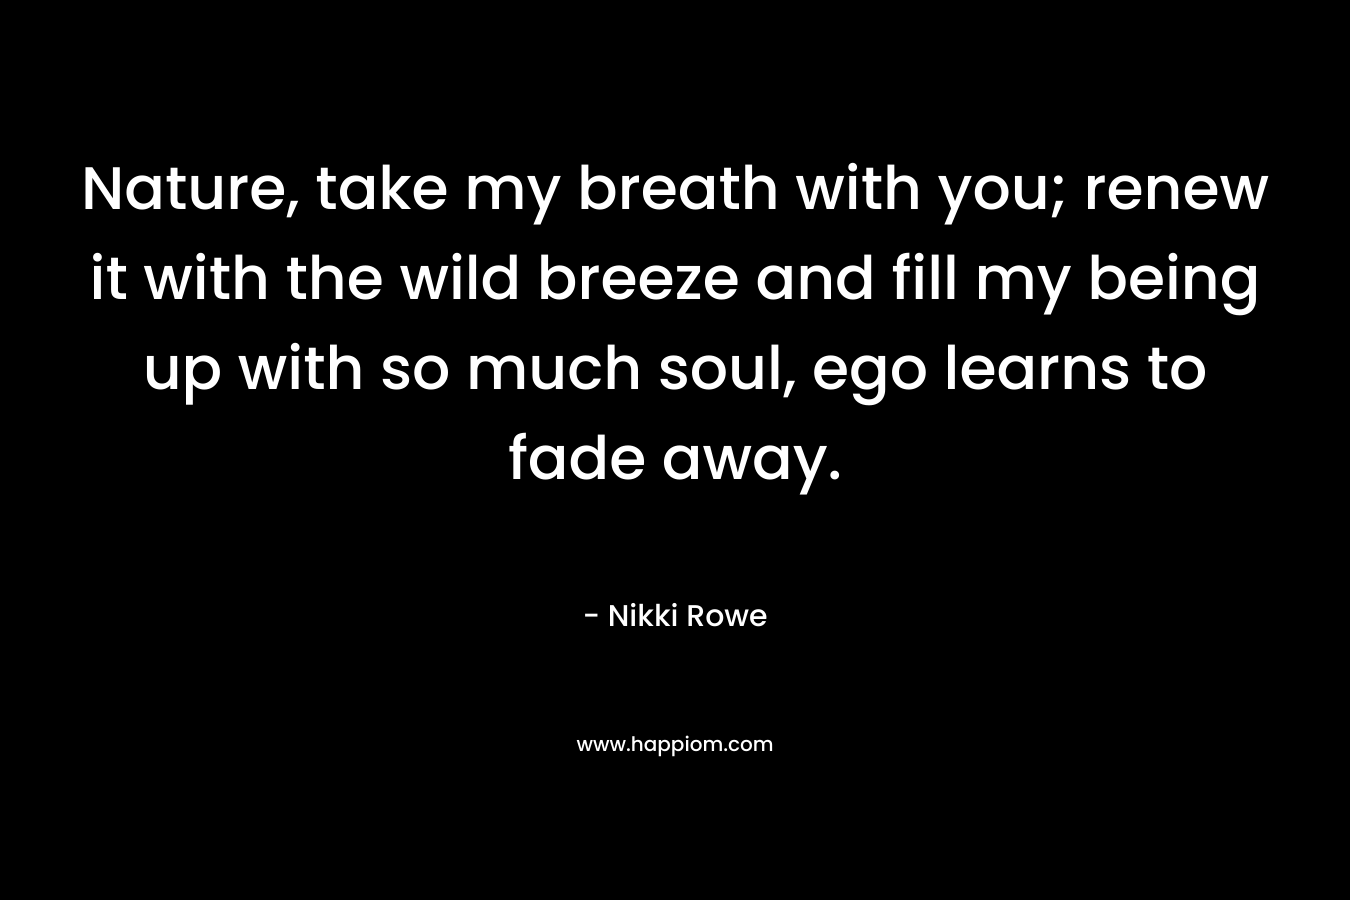 Nature, take my breath with you; renew it with the wild breeze and fill my being up with so much soul, ego learns to fade away. – Nikki Rowe